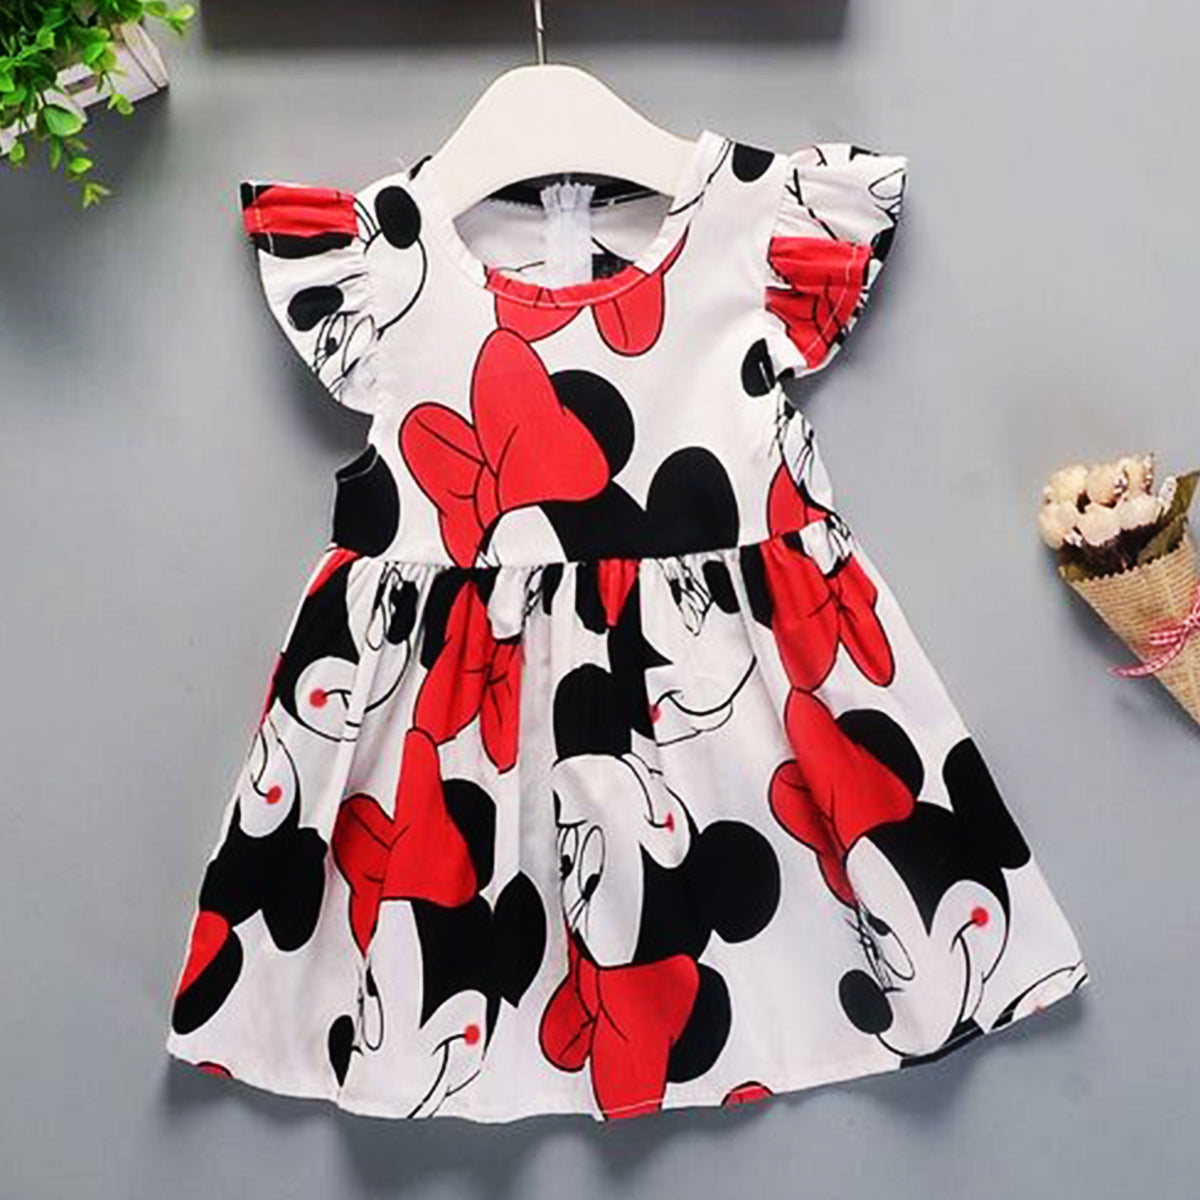 Princess BabyGirl's Stylish Cartoon Designers & Ice Candy Tunic Dresses_Frocks (Combo Pack Of 2) for Baby Girls.